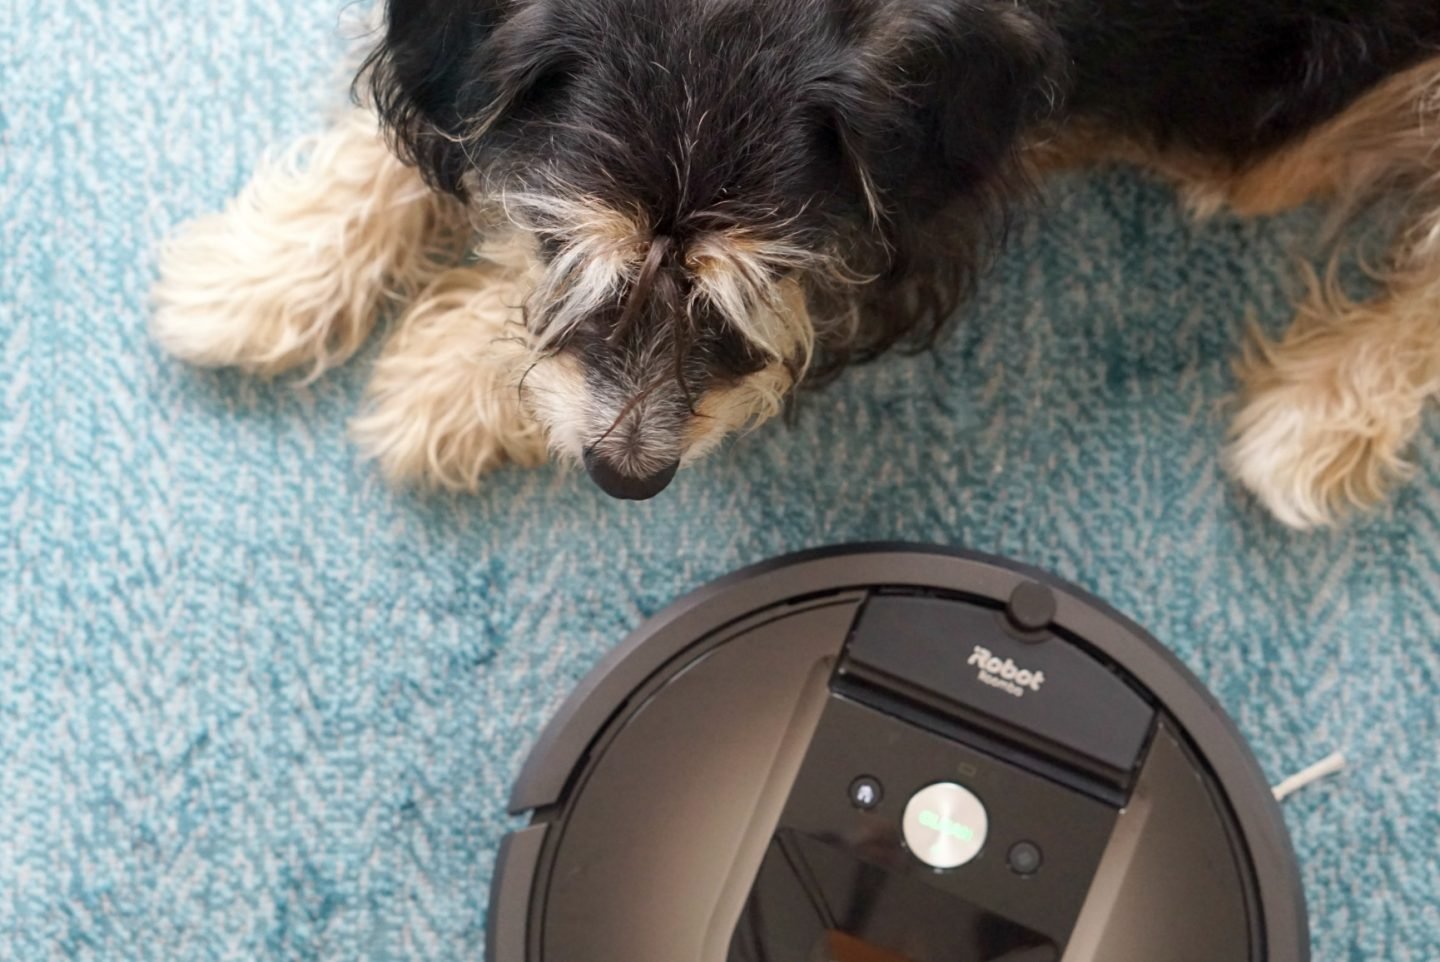 Review of the Roomba 980